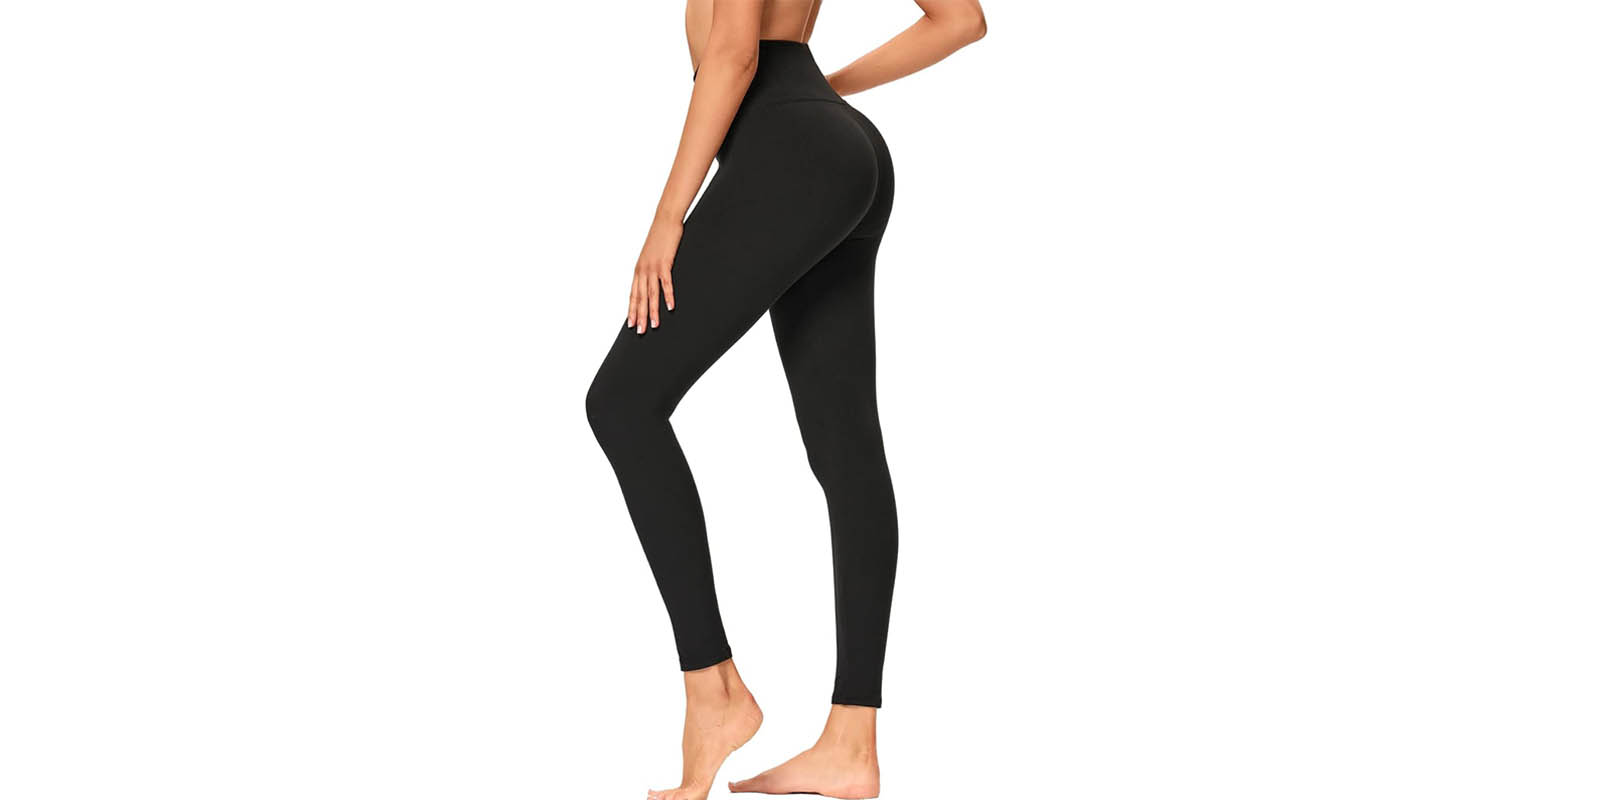 Top more than 160 best selling leggings on amazon best